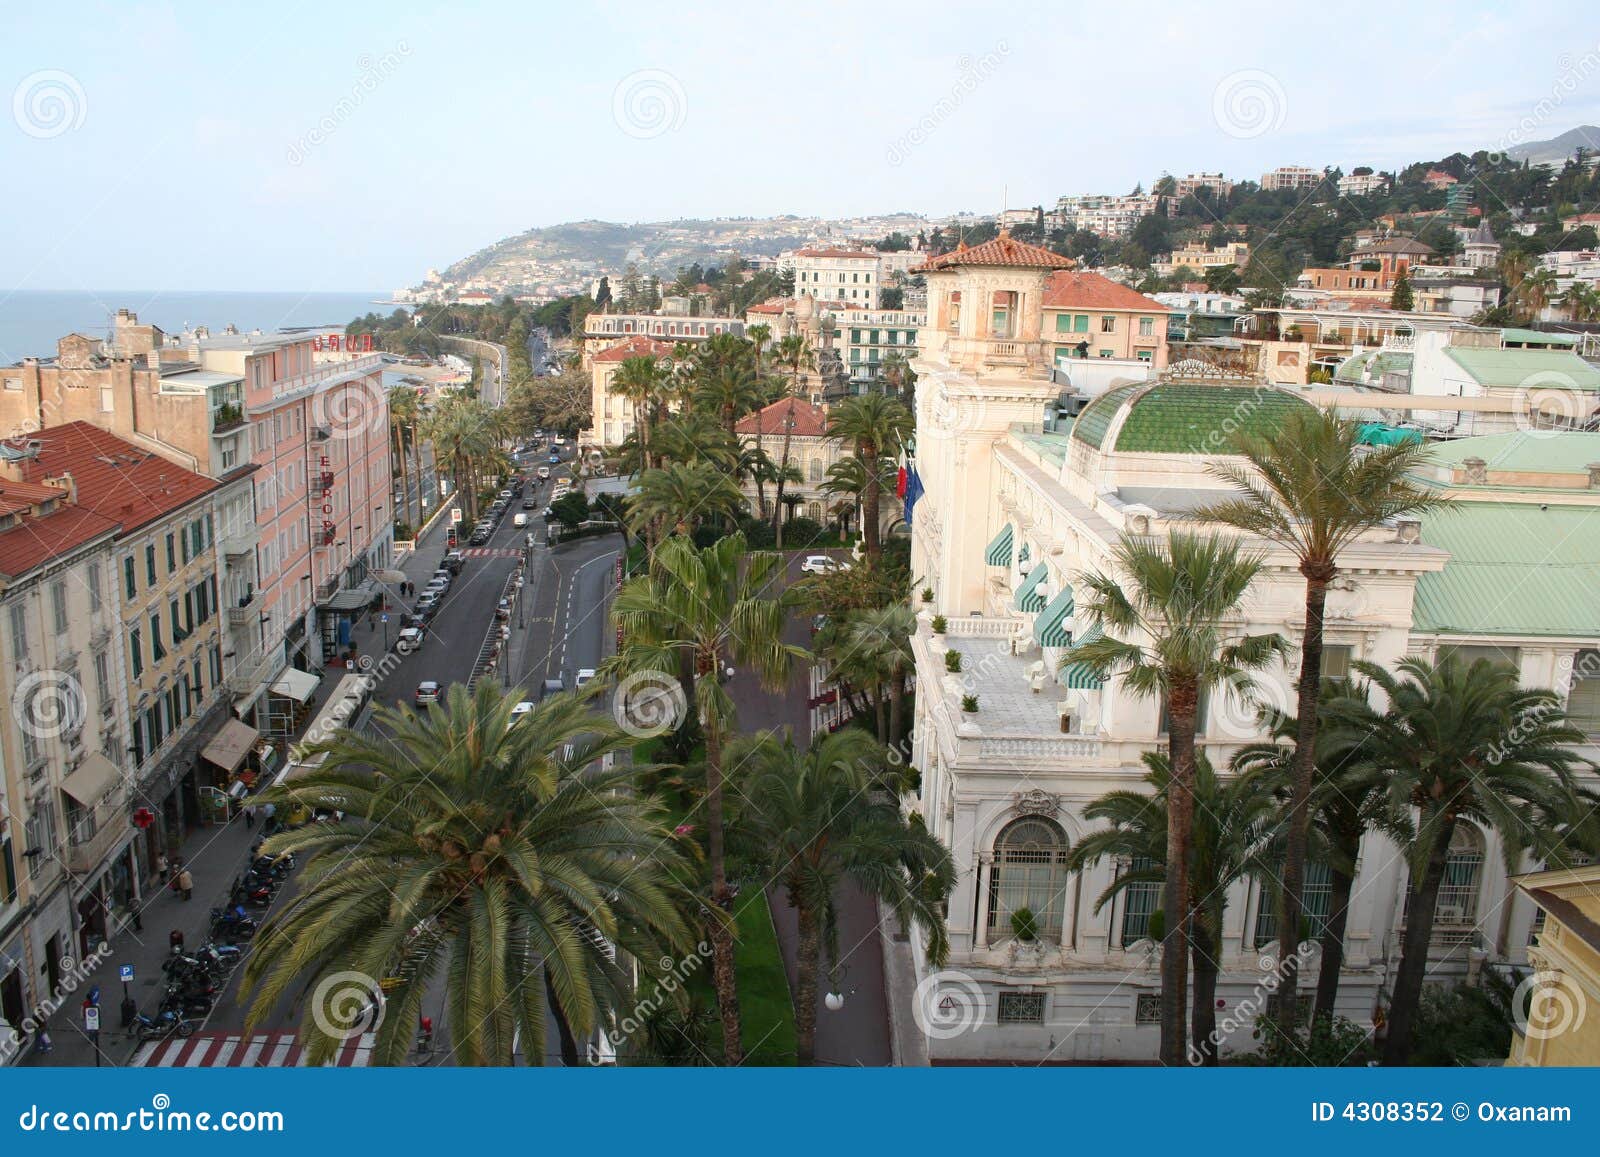 italy. a resort of san remo. a casino